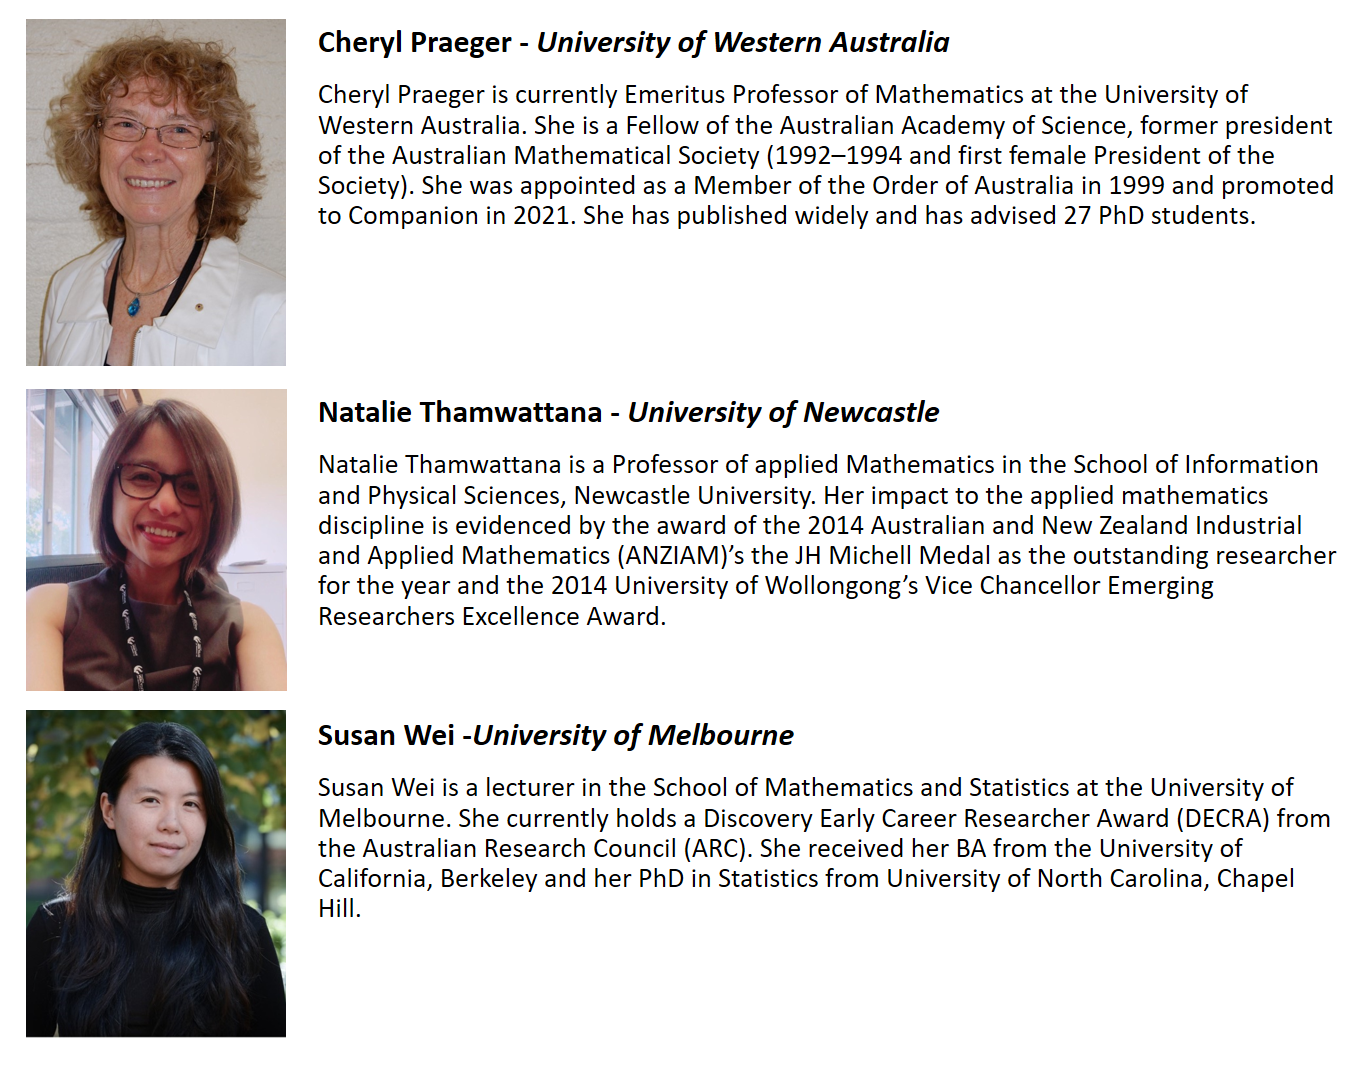 Guest speaker bios Cheryl Praeger – University of Western Australia Cheryl Praeger is currently Emeritus Professor of Mathematics at the University of Western Australia. She is a Fellow of the Australian Academy of Science, former president of the Australian Mathematical Society (1992 – 1994 and first female President of the society). She was appointed as a Member of the Order of Australia in 1999 and promoted to Companion in 2021. She has published widely and has advised 27 PhD students.  Natalie Thamwattana – University of Newcastle Natalie Thamwattana is a Professor of Applied Mathematics in the School of Information and Physical Sciences, Newcastle University. Her impact to the applied mathematics discipline is evidenced by the award of the 2014 Australia and New Zealand Industrial and Applied Mathematics (ANZIAM)’s JH Michell Medal as the outstanding researcher for the year and the 2014 University of Wollongong’s Vice Chancellor Emerging Researchers Excellence Award.  Susan Wei – University of Melbourne Susan Wei is a lecturer in the School of Mathematics and Statistics at the University of Melbourne. She currently holds a Discovery Early Career Researcher Award (DECRA) from the Australian Research Council (ARC). She received her BA from the University of California. Berkley and her PhD in Statistics from University of North Carolina, Chape3l Hill.